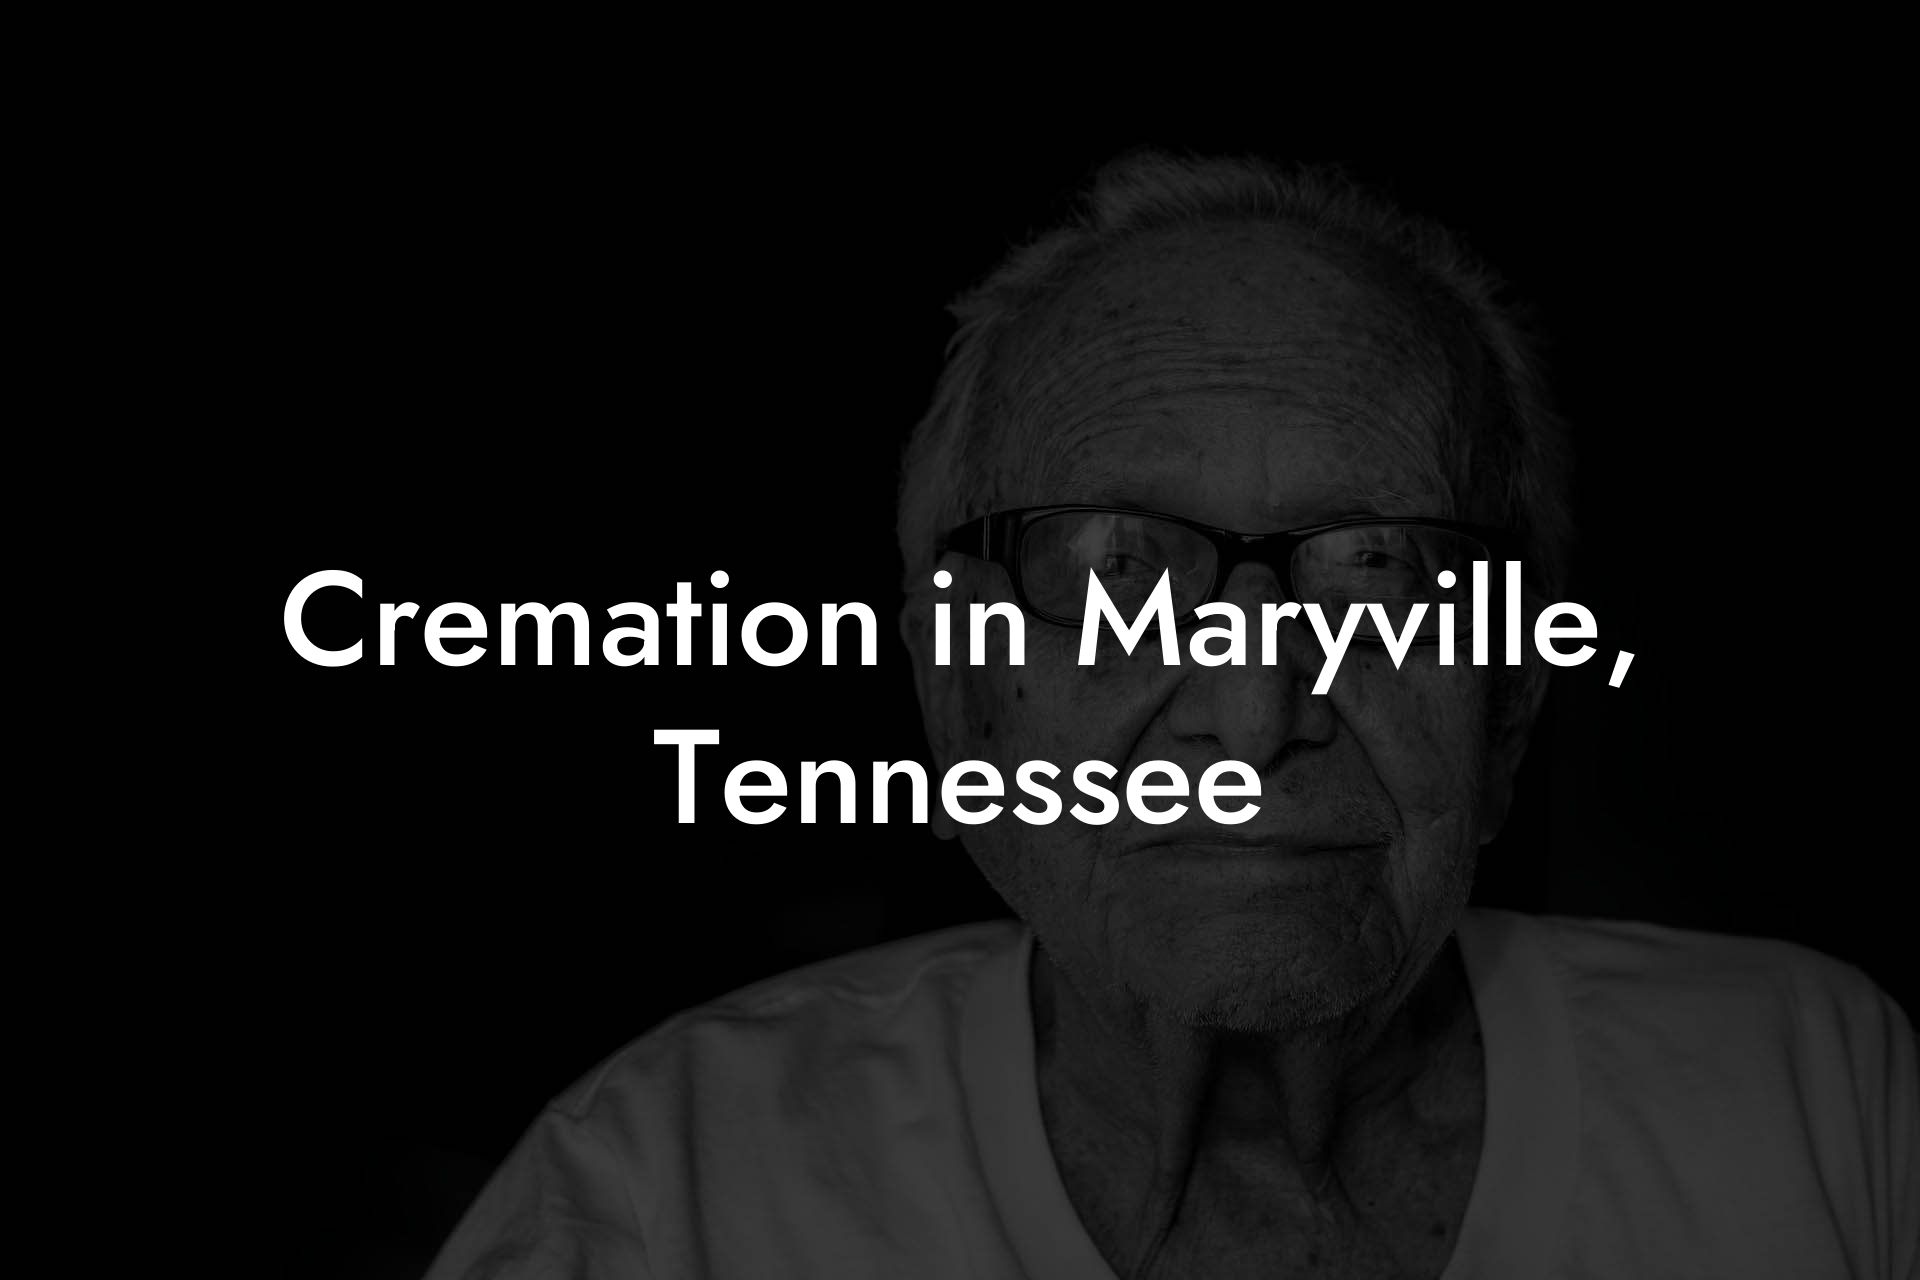 Cremation in Maryville, Tennessee